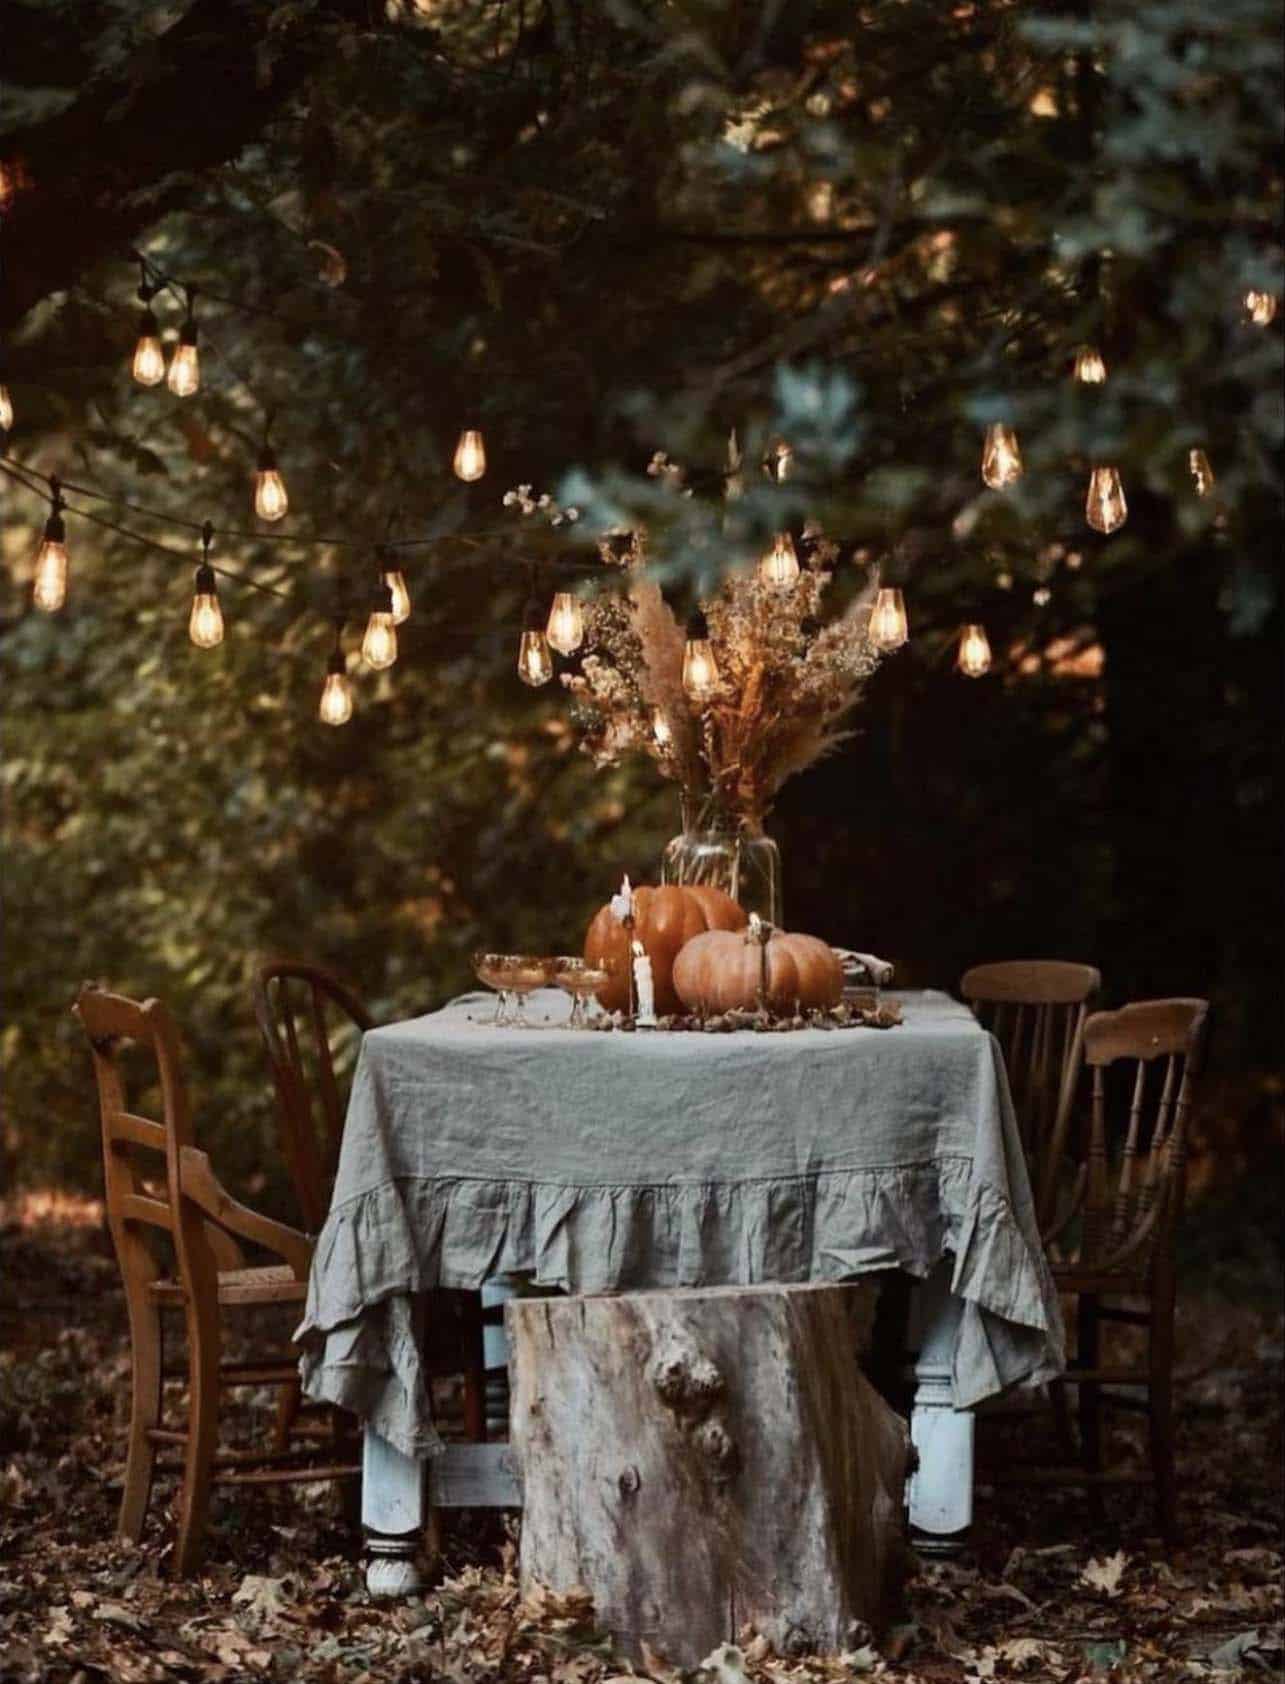 outdoor cozy autumn view of a dining table on an oak tree with string lights